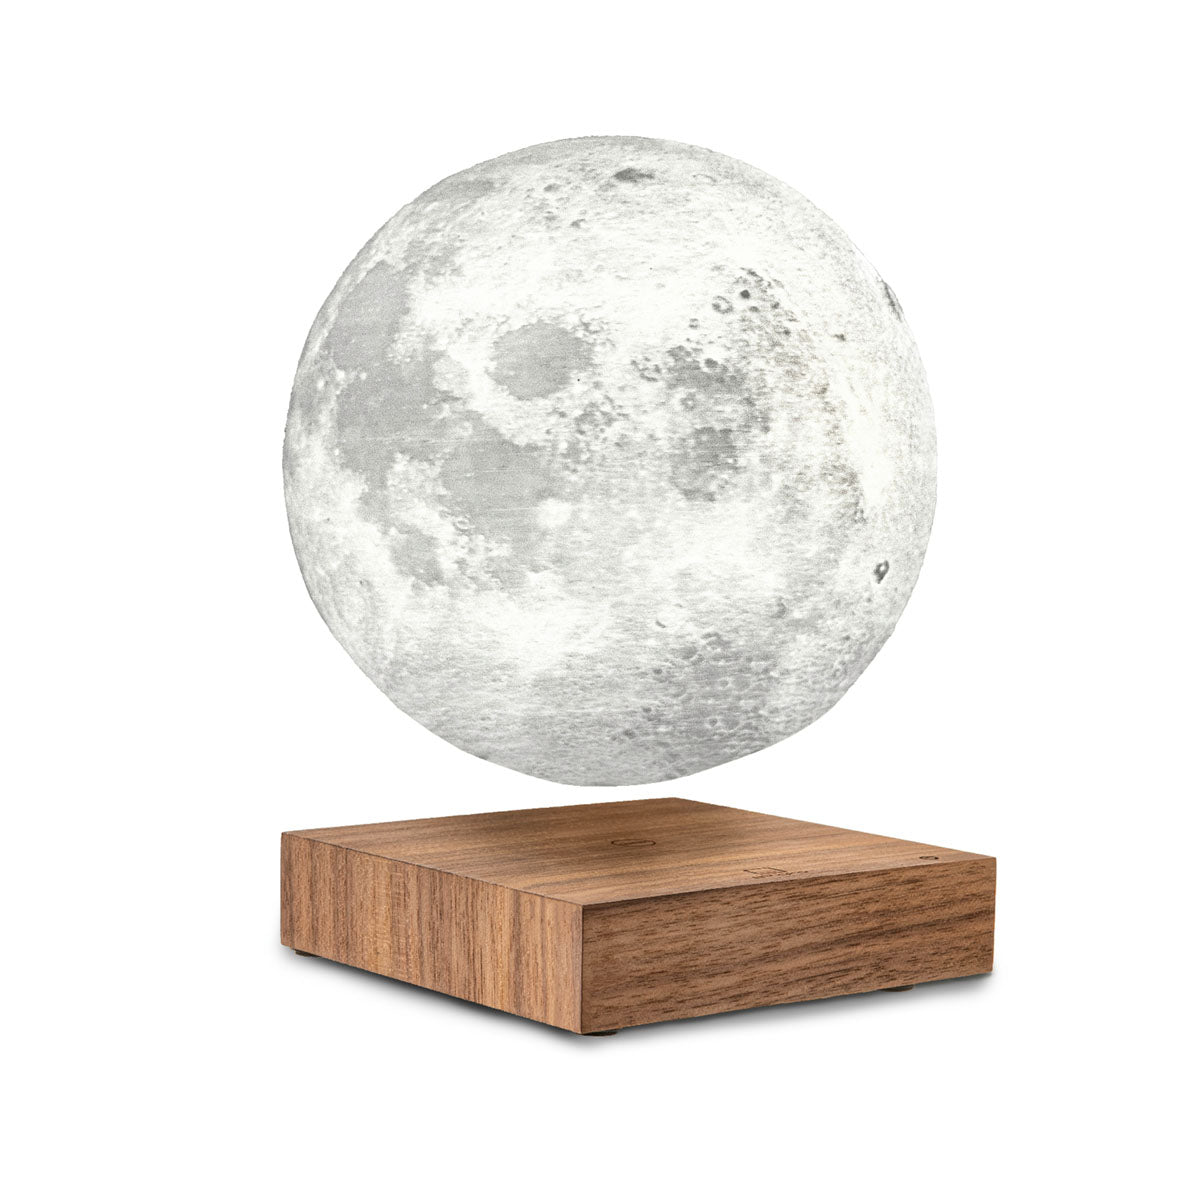 The Smart Moon Lamp: Walnut displayed with its base at an angle.